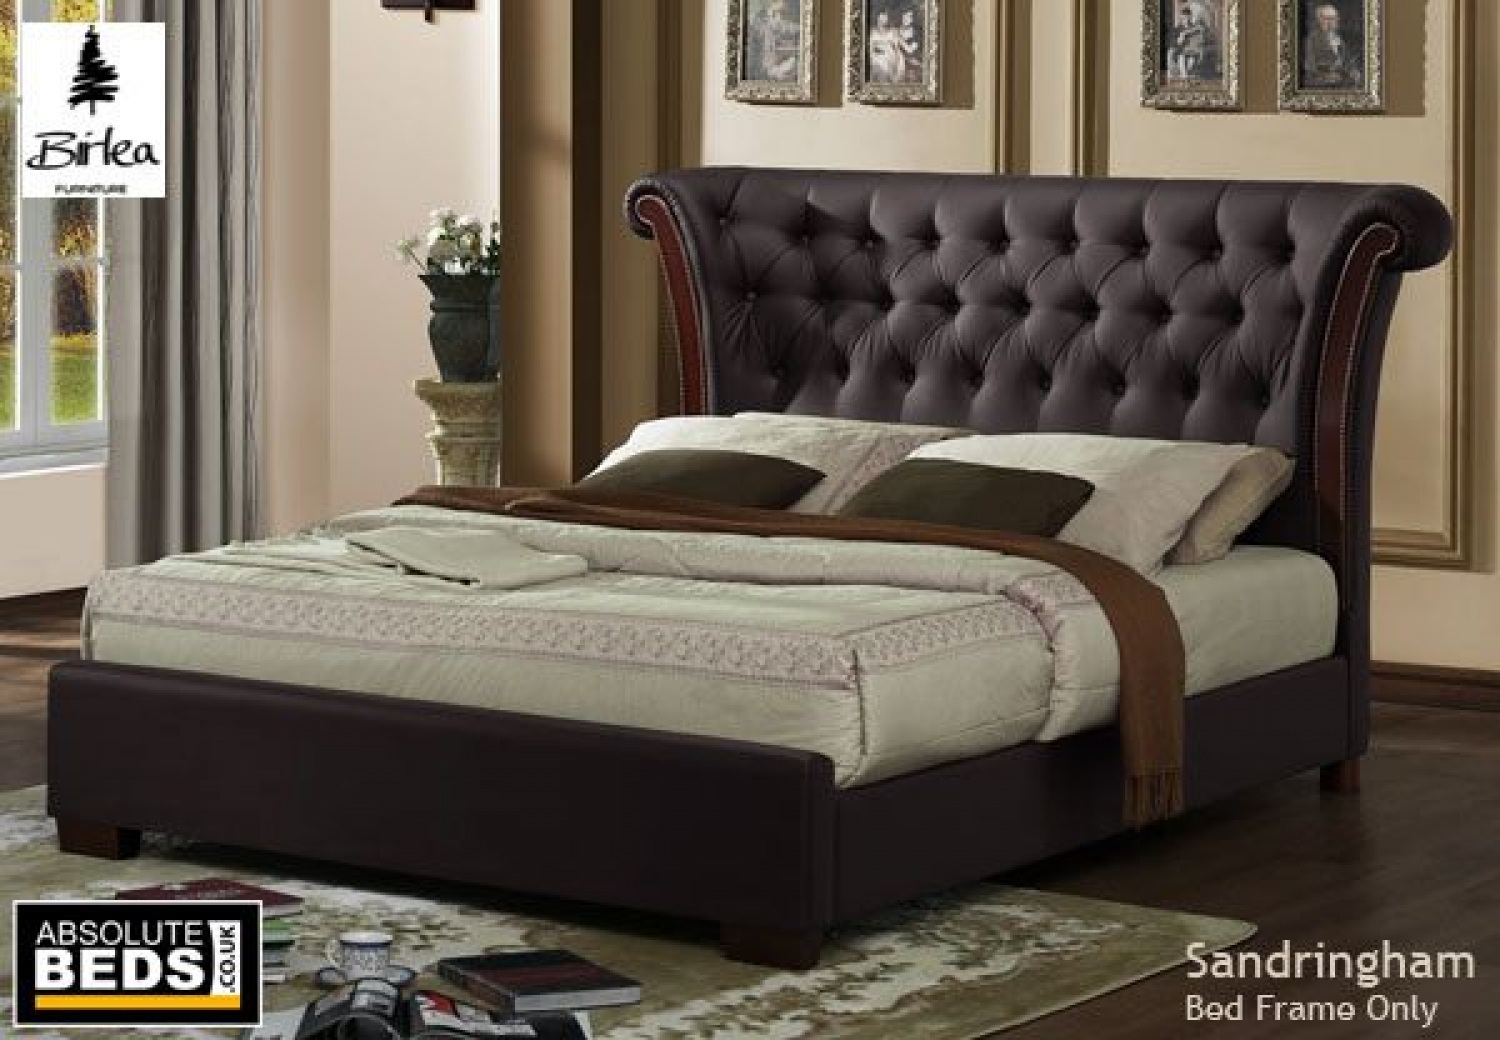 birlea sandringham leather bed frame, separately. At Absolute Beds you can build a better bed time and sleeping zone, you can built a comforting sleeping area image